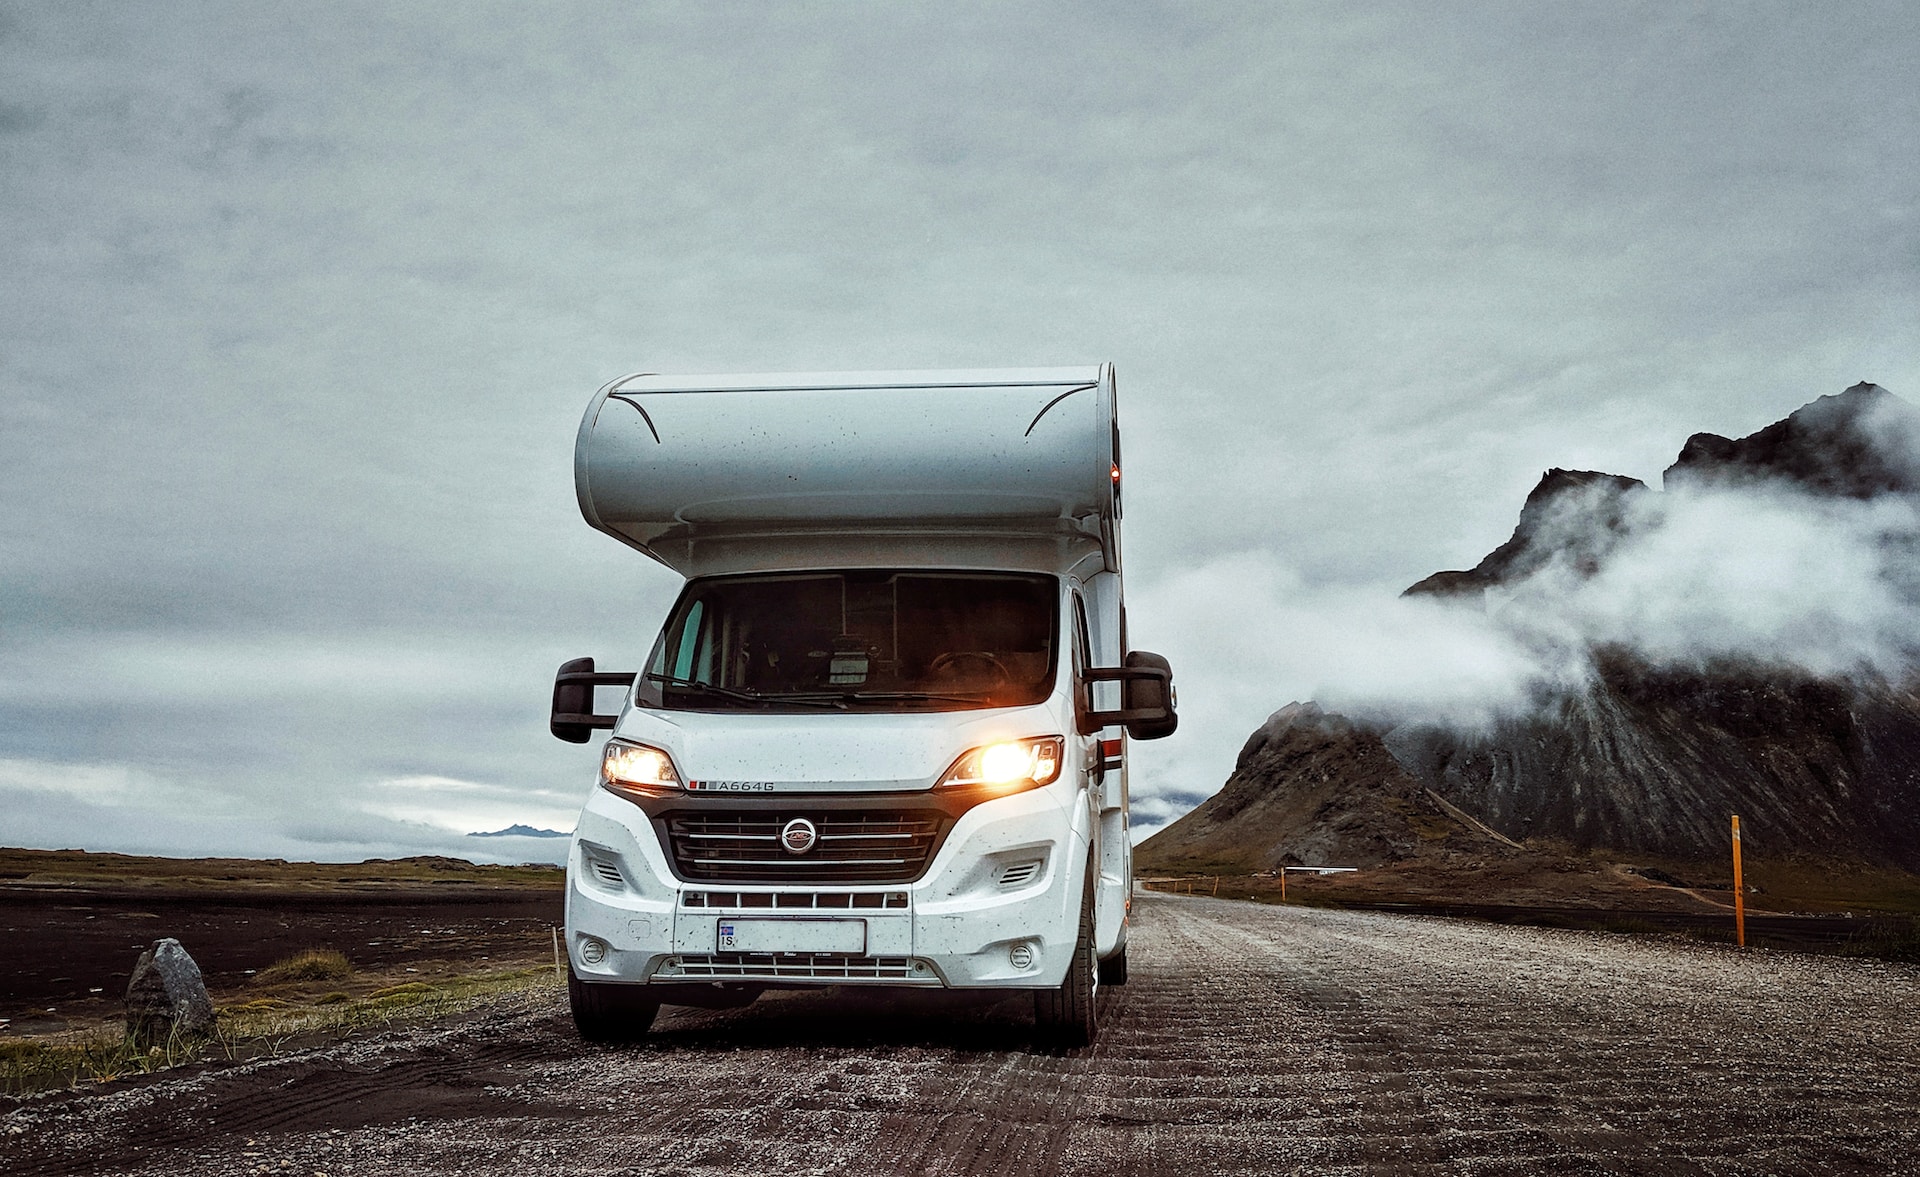 solar powered rv driving in Iceland